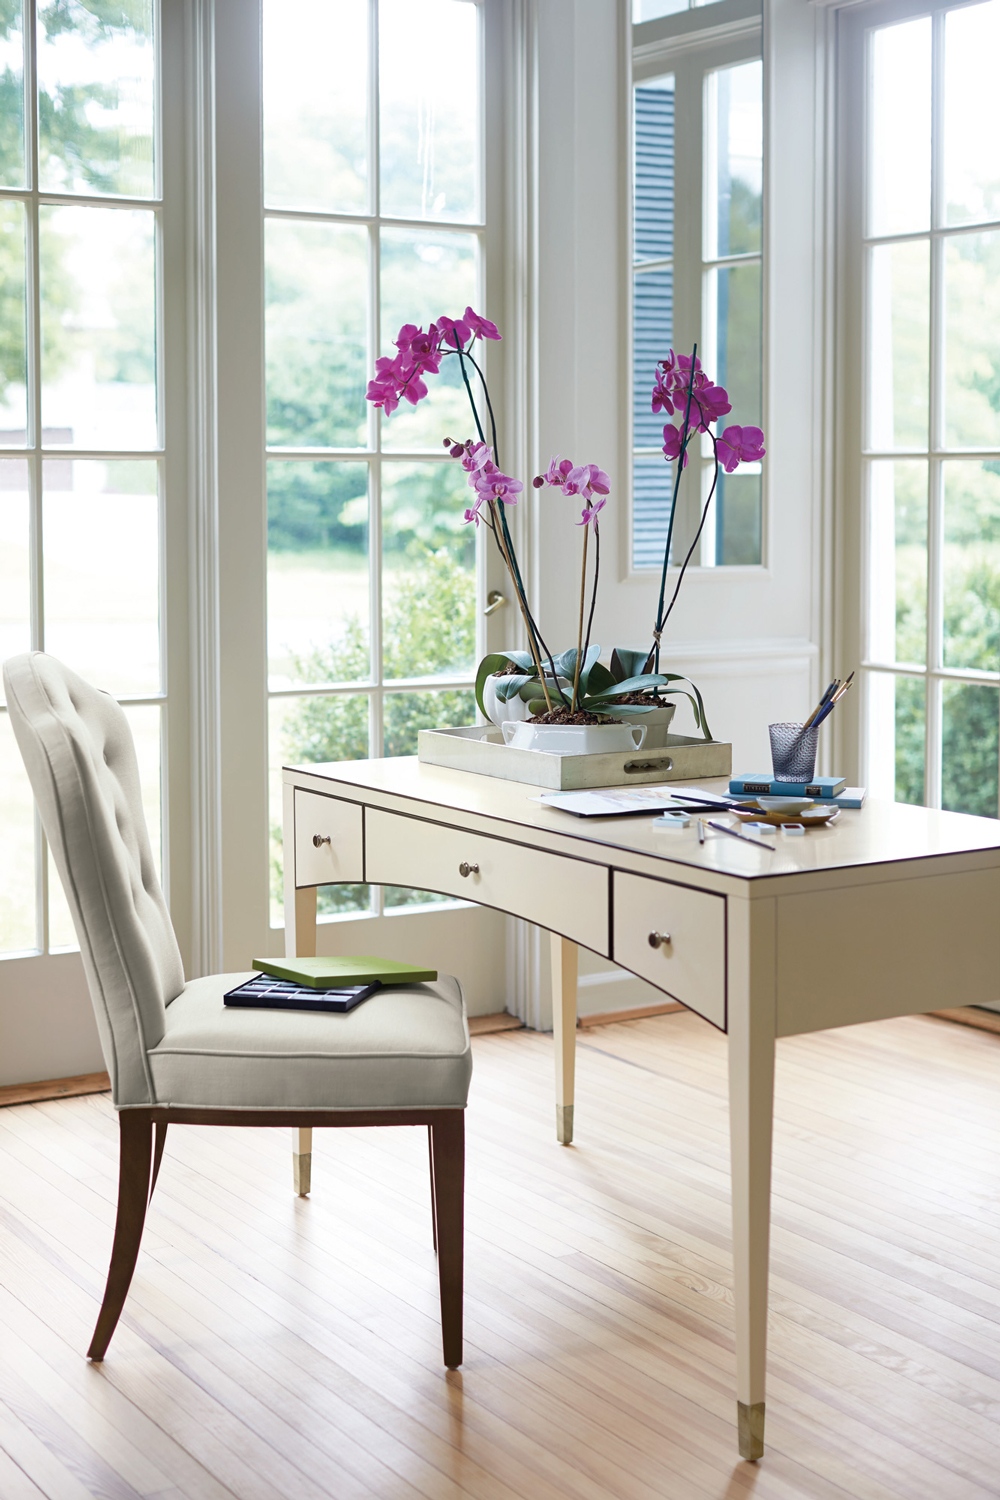 WORKING FROM HOME: HOW TO DESIGN THE PERFECT HOME OFFICE